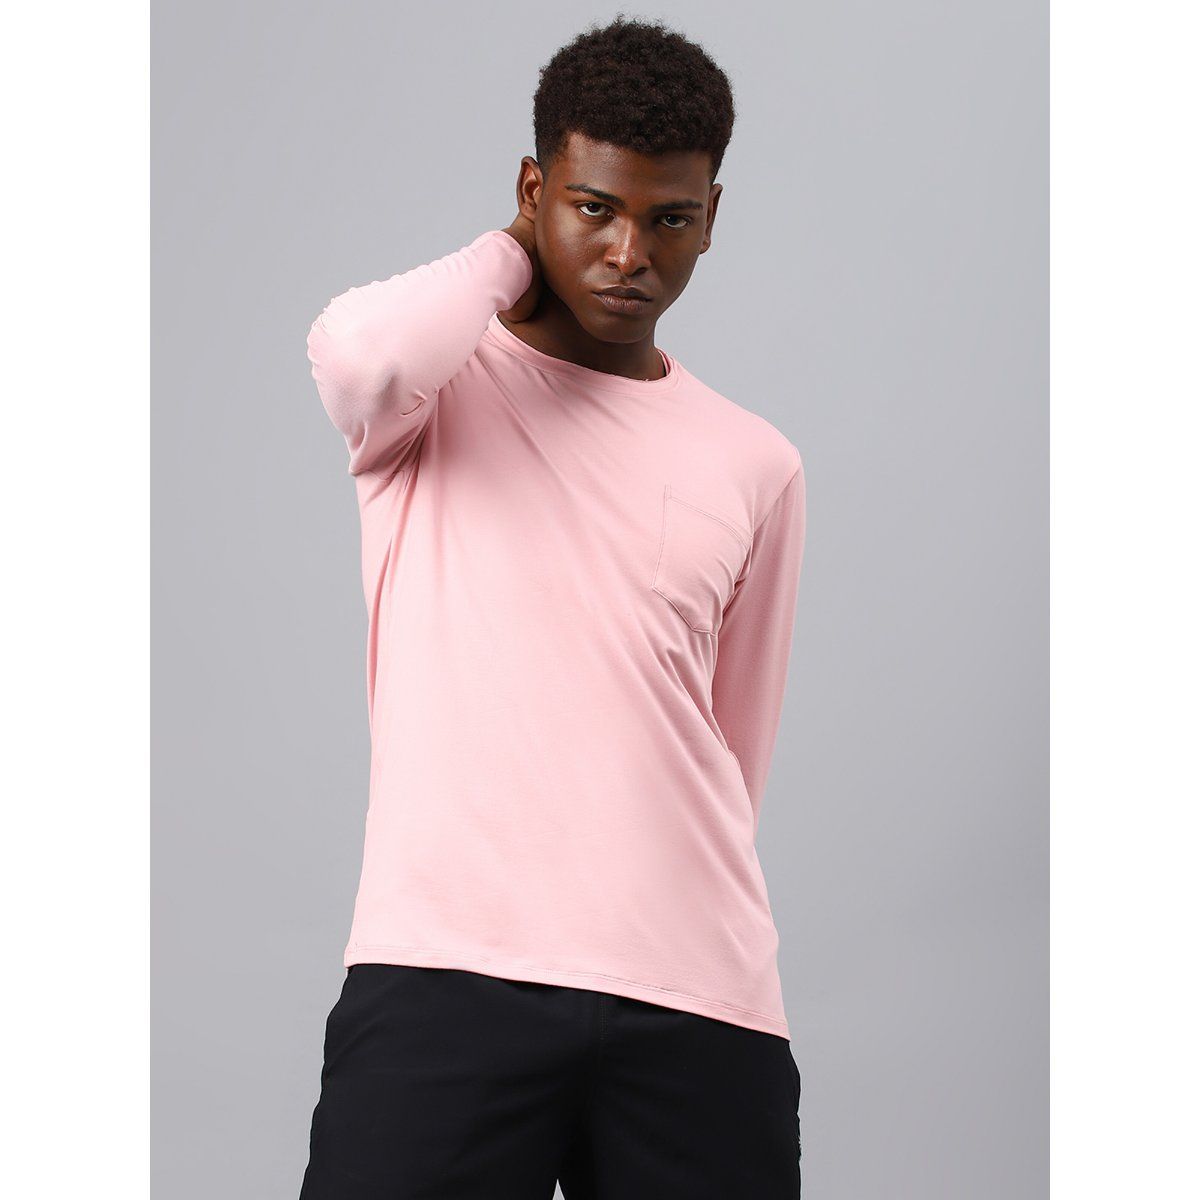 Buy Fitkin Men Nude Pink Raw Edge Neck Style Long Sleeves T-shirt